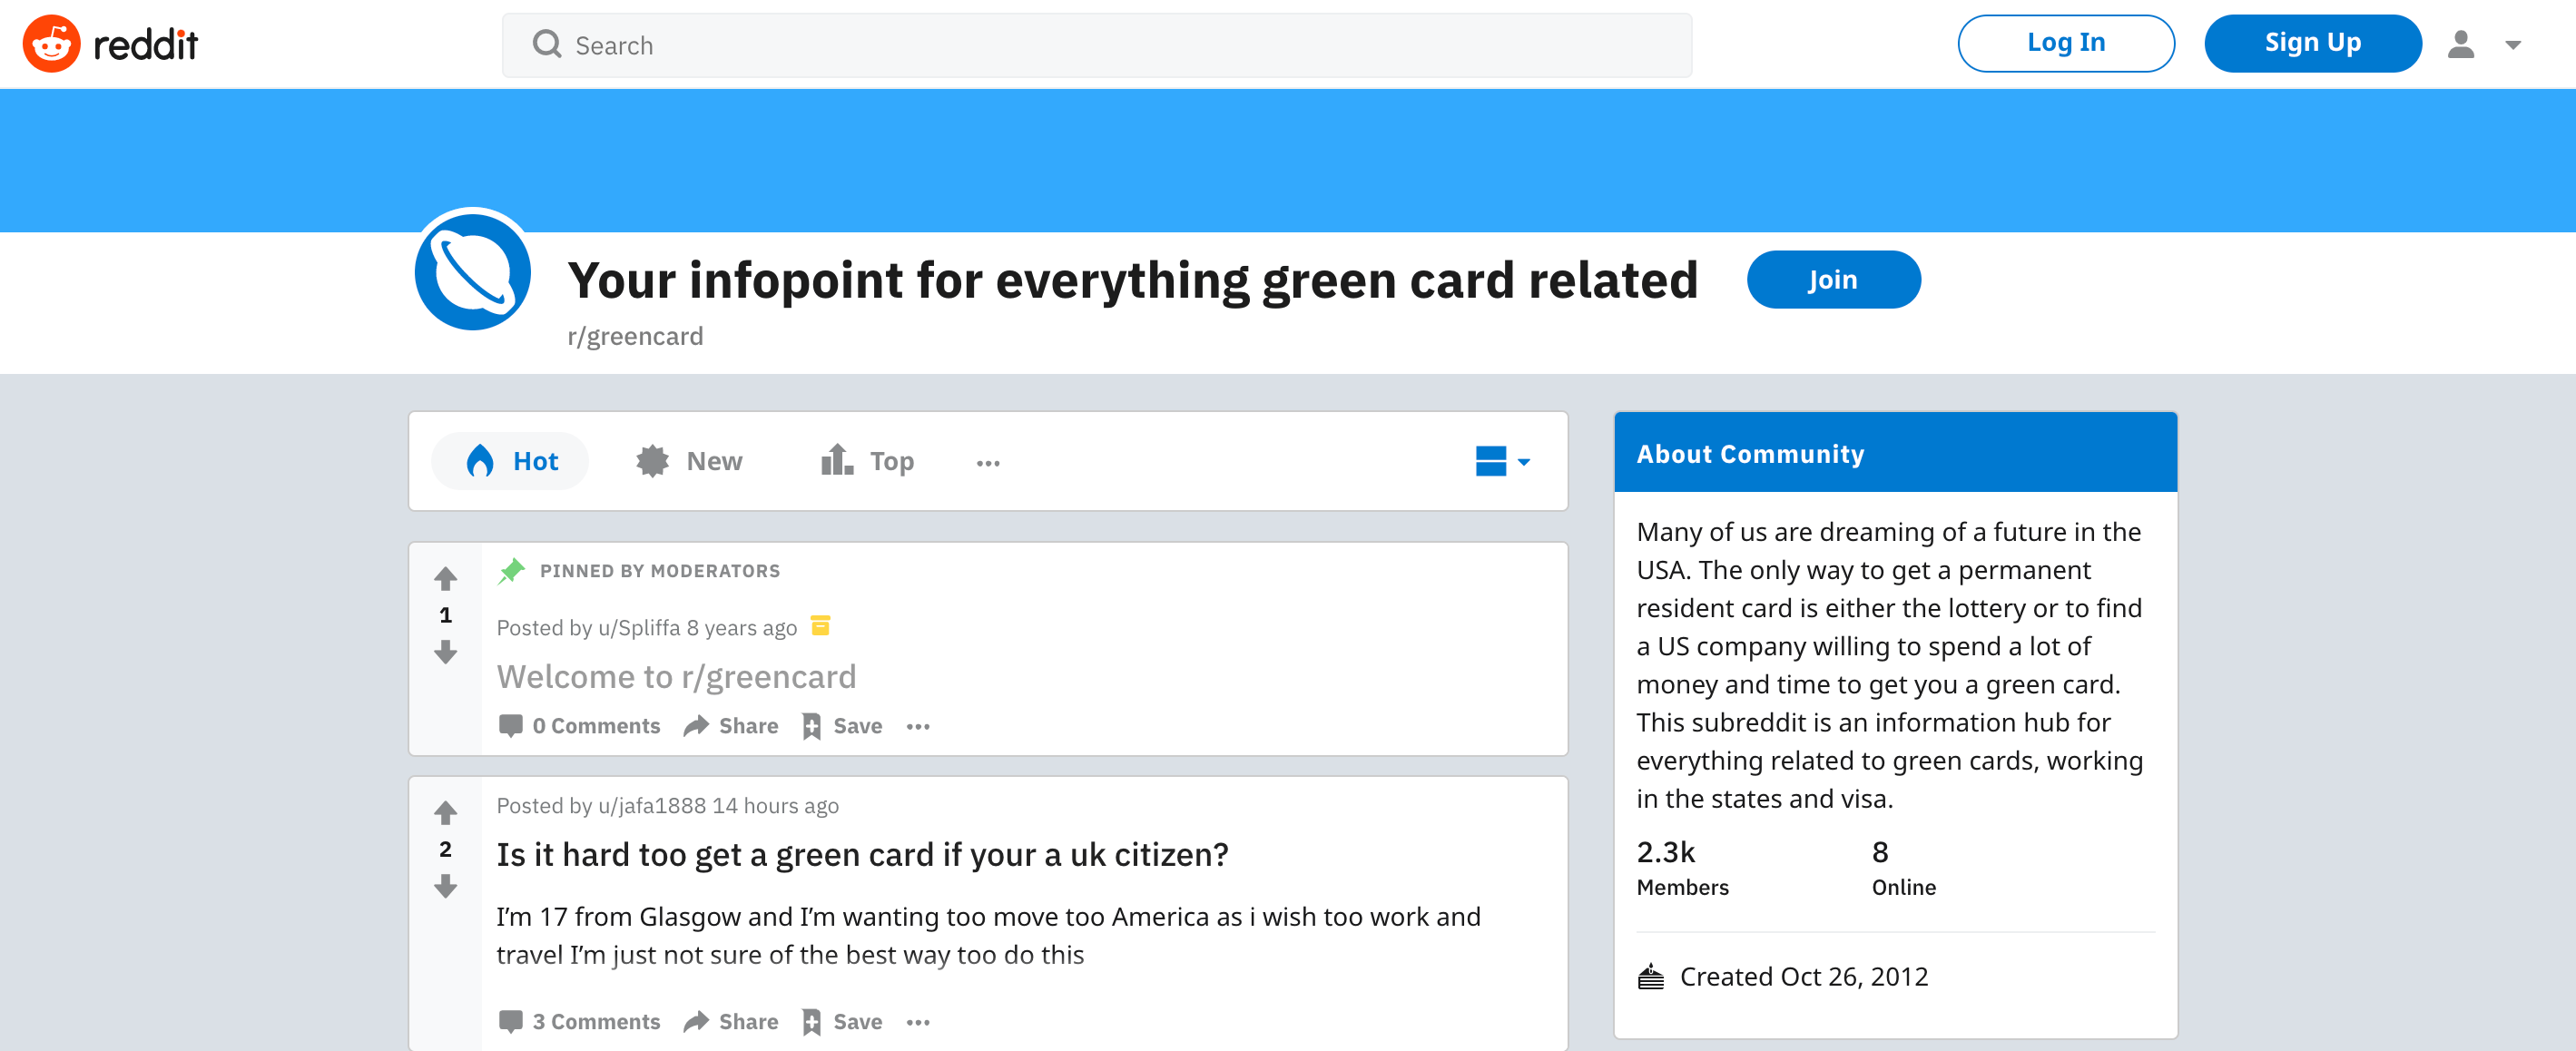 Green card questions on Reddit